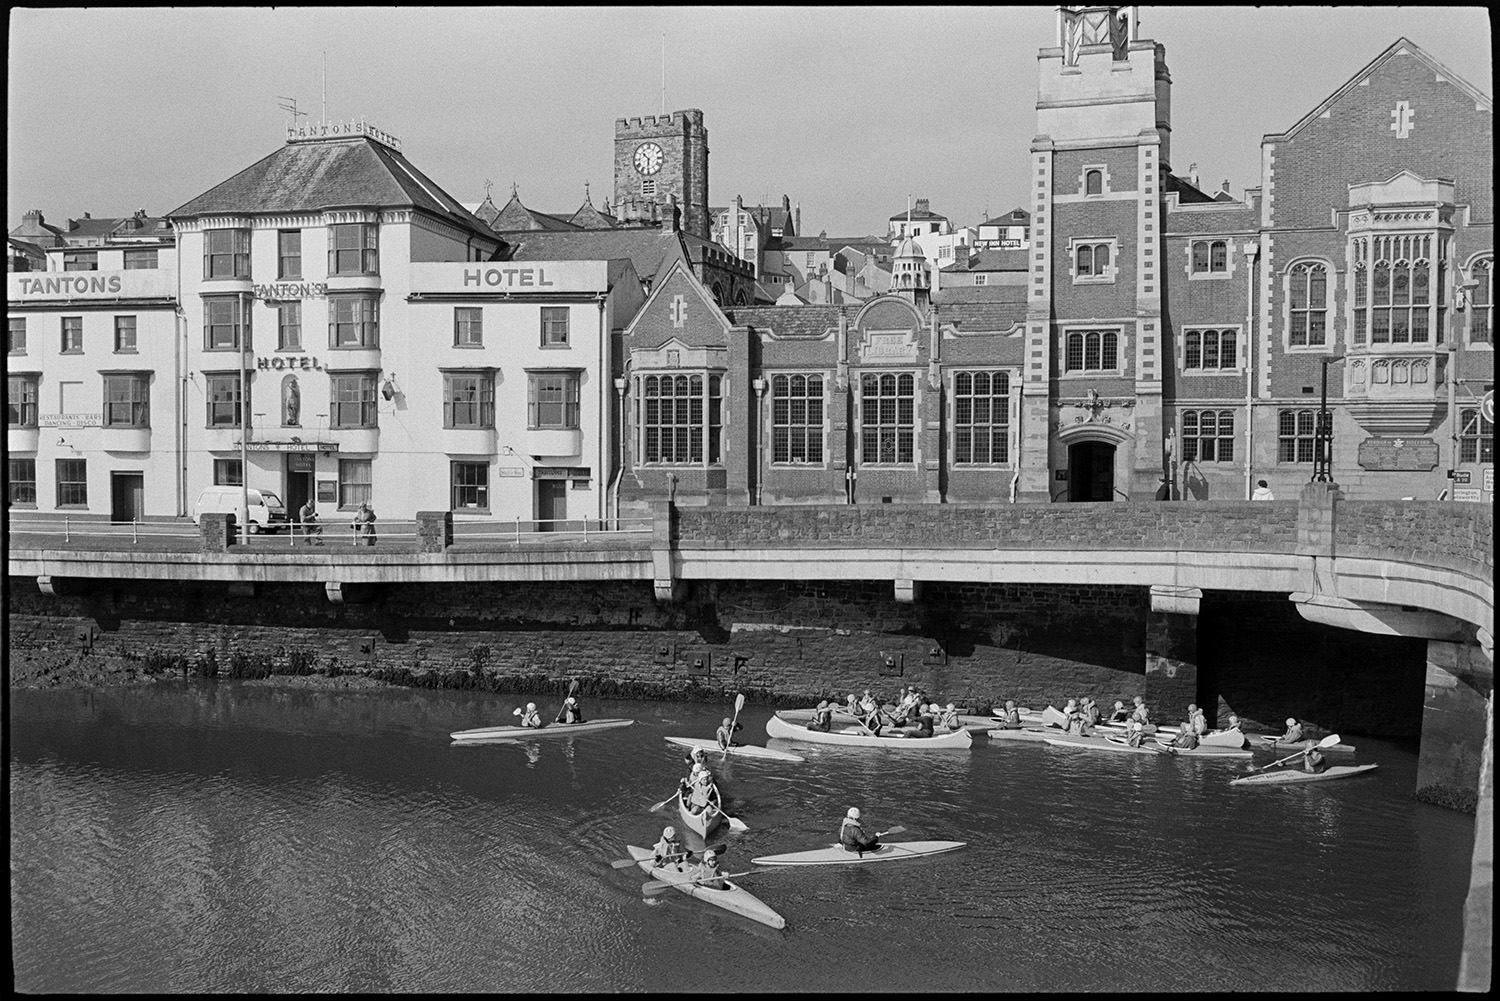 Canoeists on river, quayside capsized canoe! Houses on waterfront. <br />
[People canoeing on the River Torridge by Bideford Long Bridge, also known as Bideford Old Bridge. Building can be seen along the waterfront, including Tanton's Hotel.]